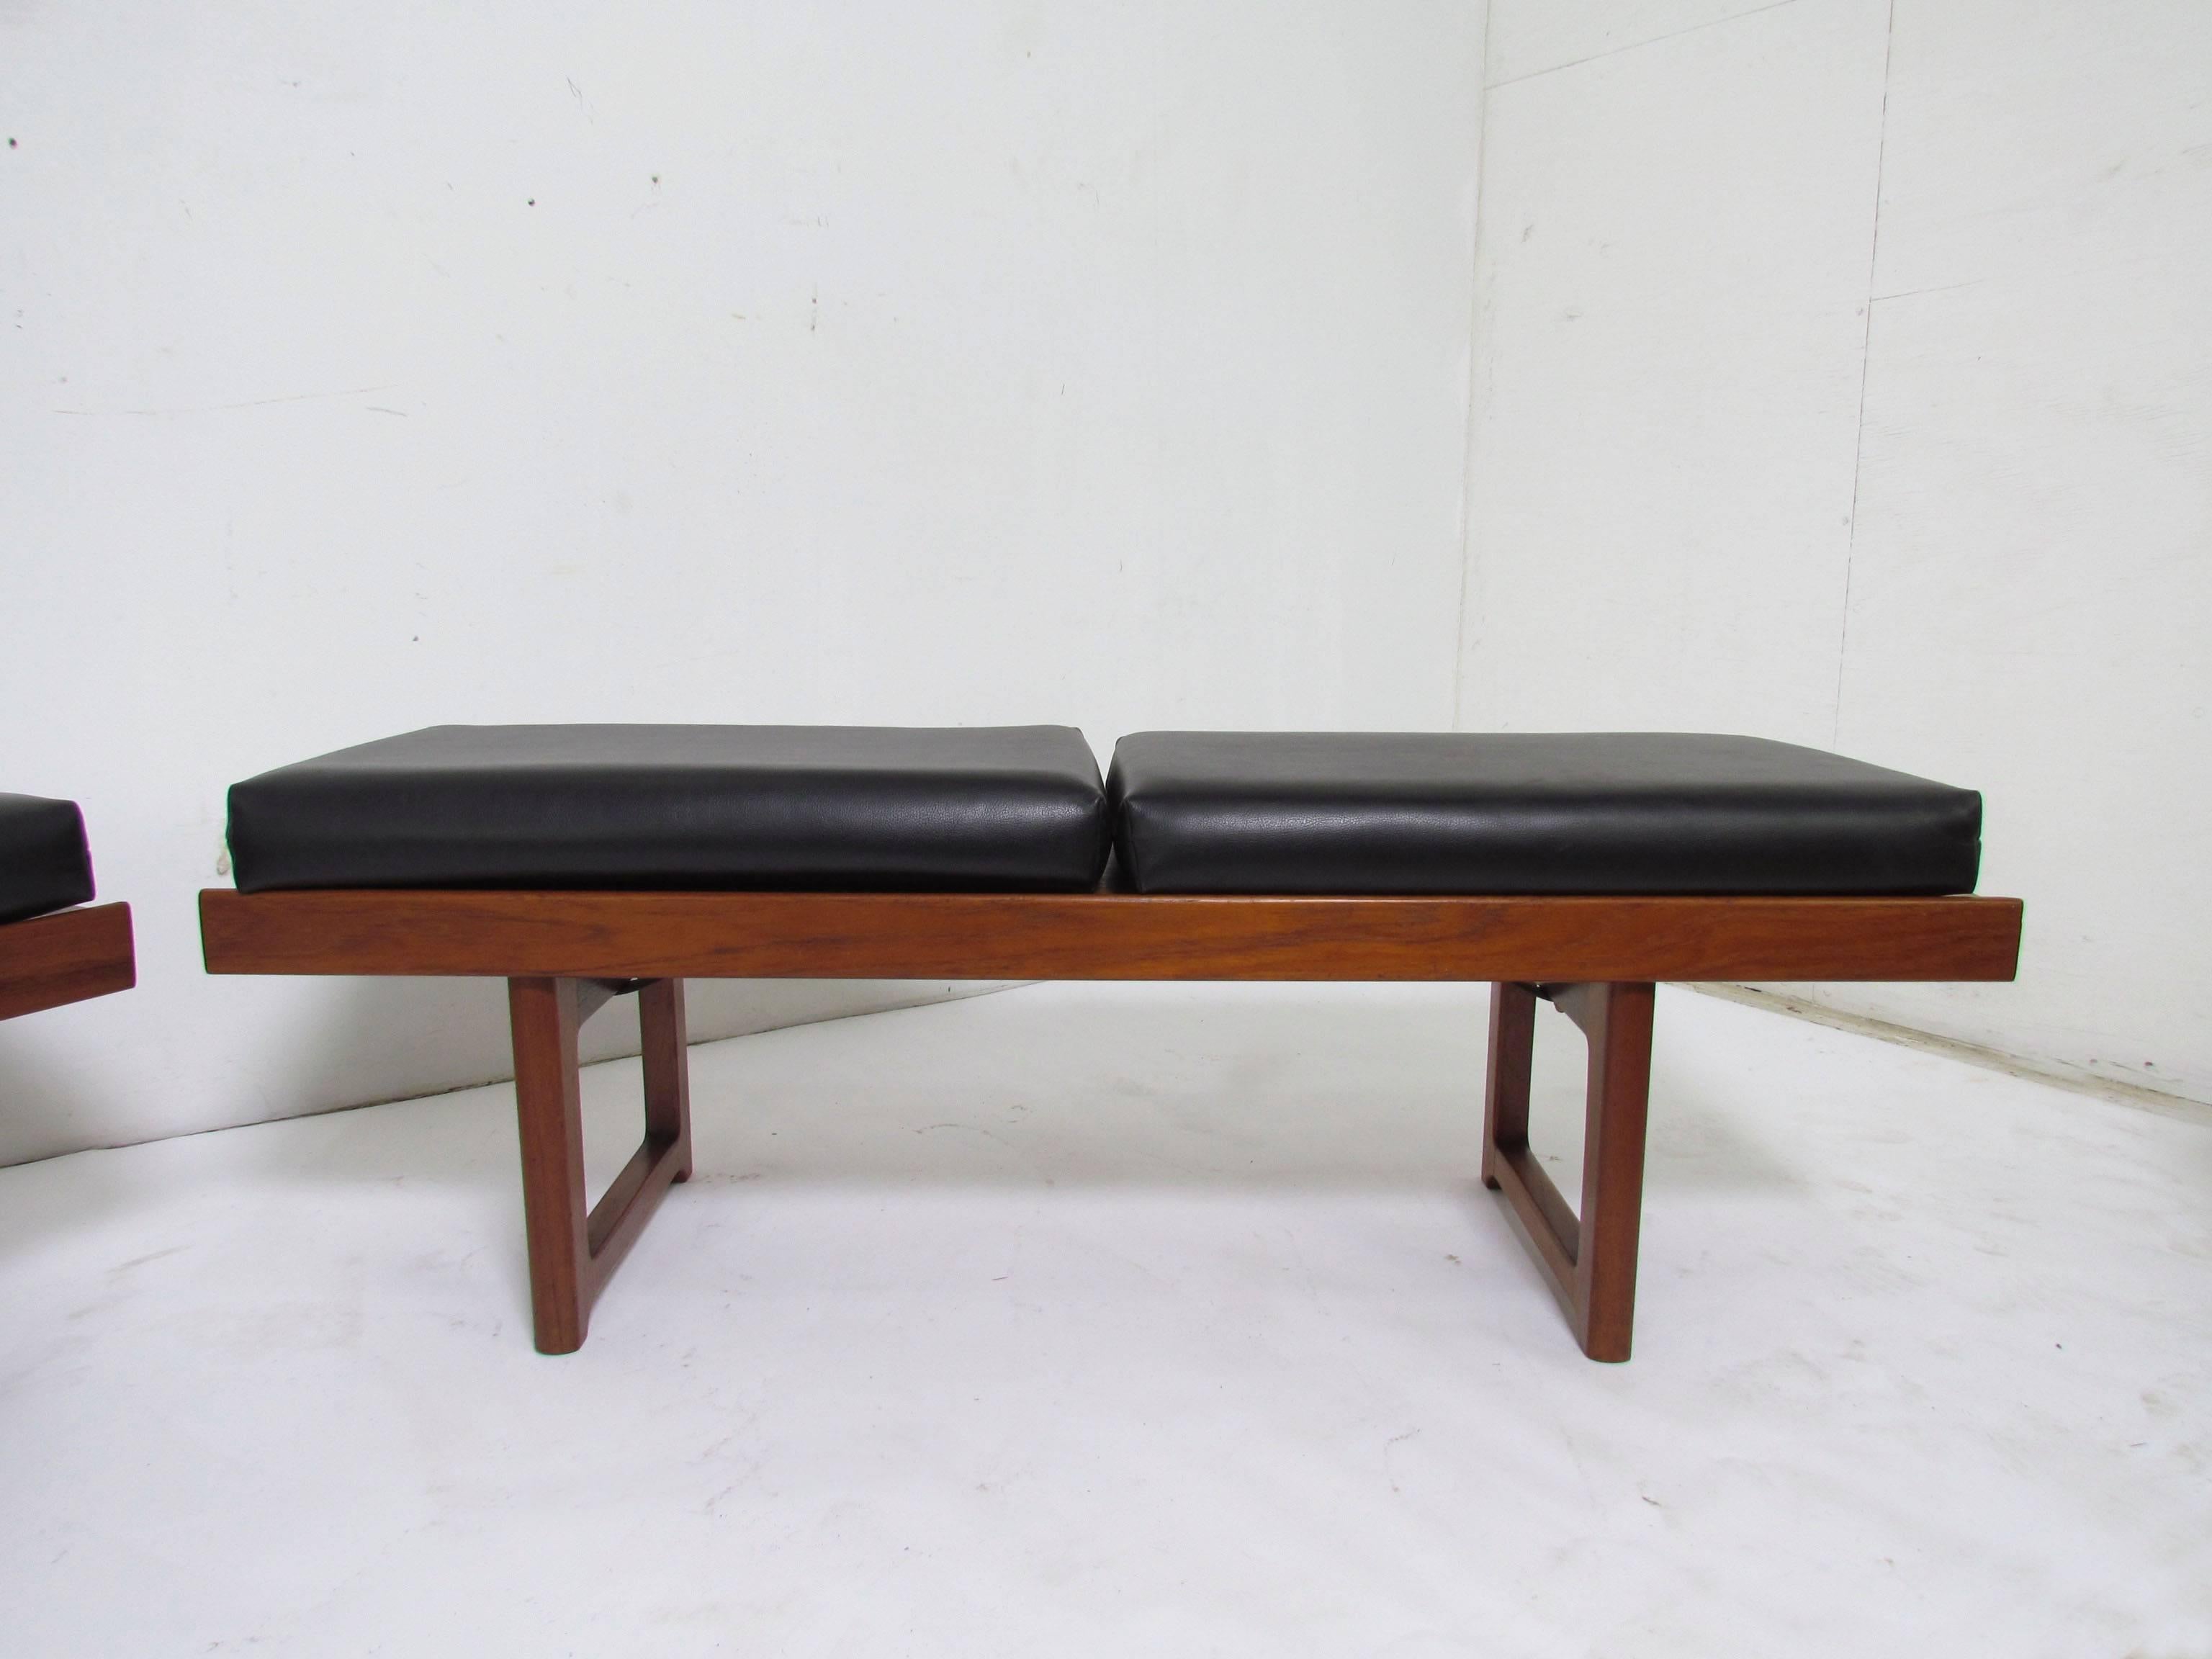 A pair of teak benches with original cushions, designed by Torbjørn Afdal for Bruksbo, made in Norway, circa 1960s. These can serve as either a coffee tables or seating.

Measures: Seat height (with cushions) is 16